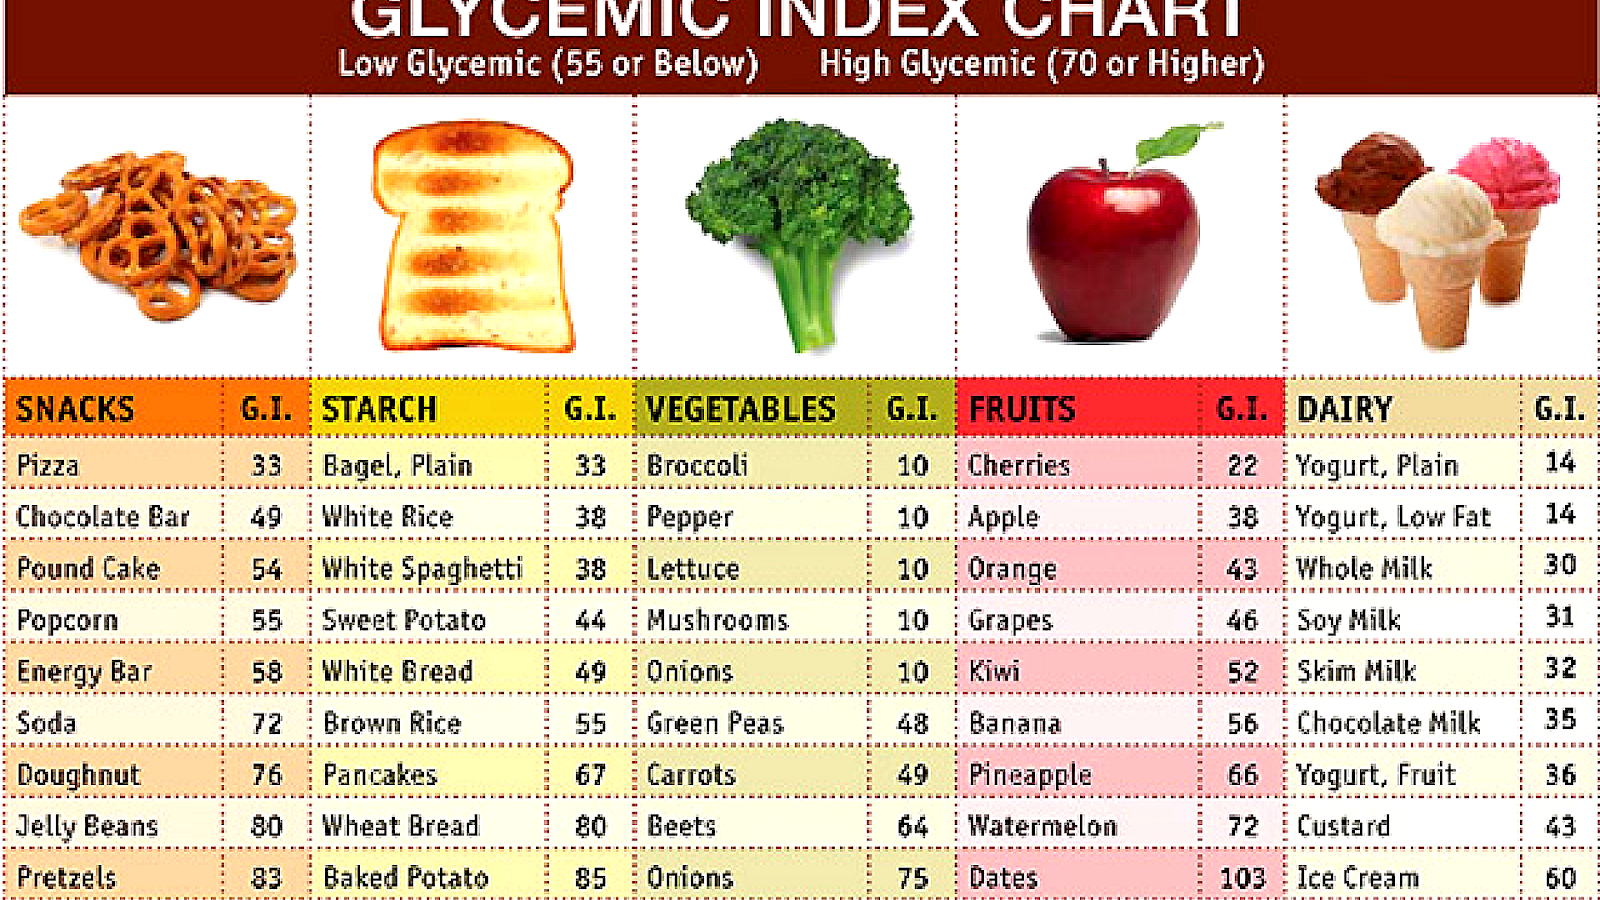 Fruit With High Glycemic Index - Index Choices